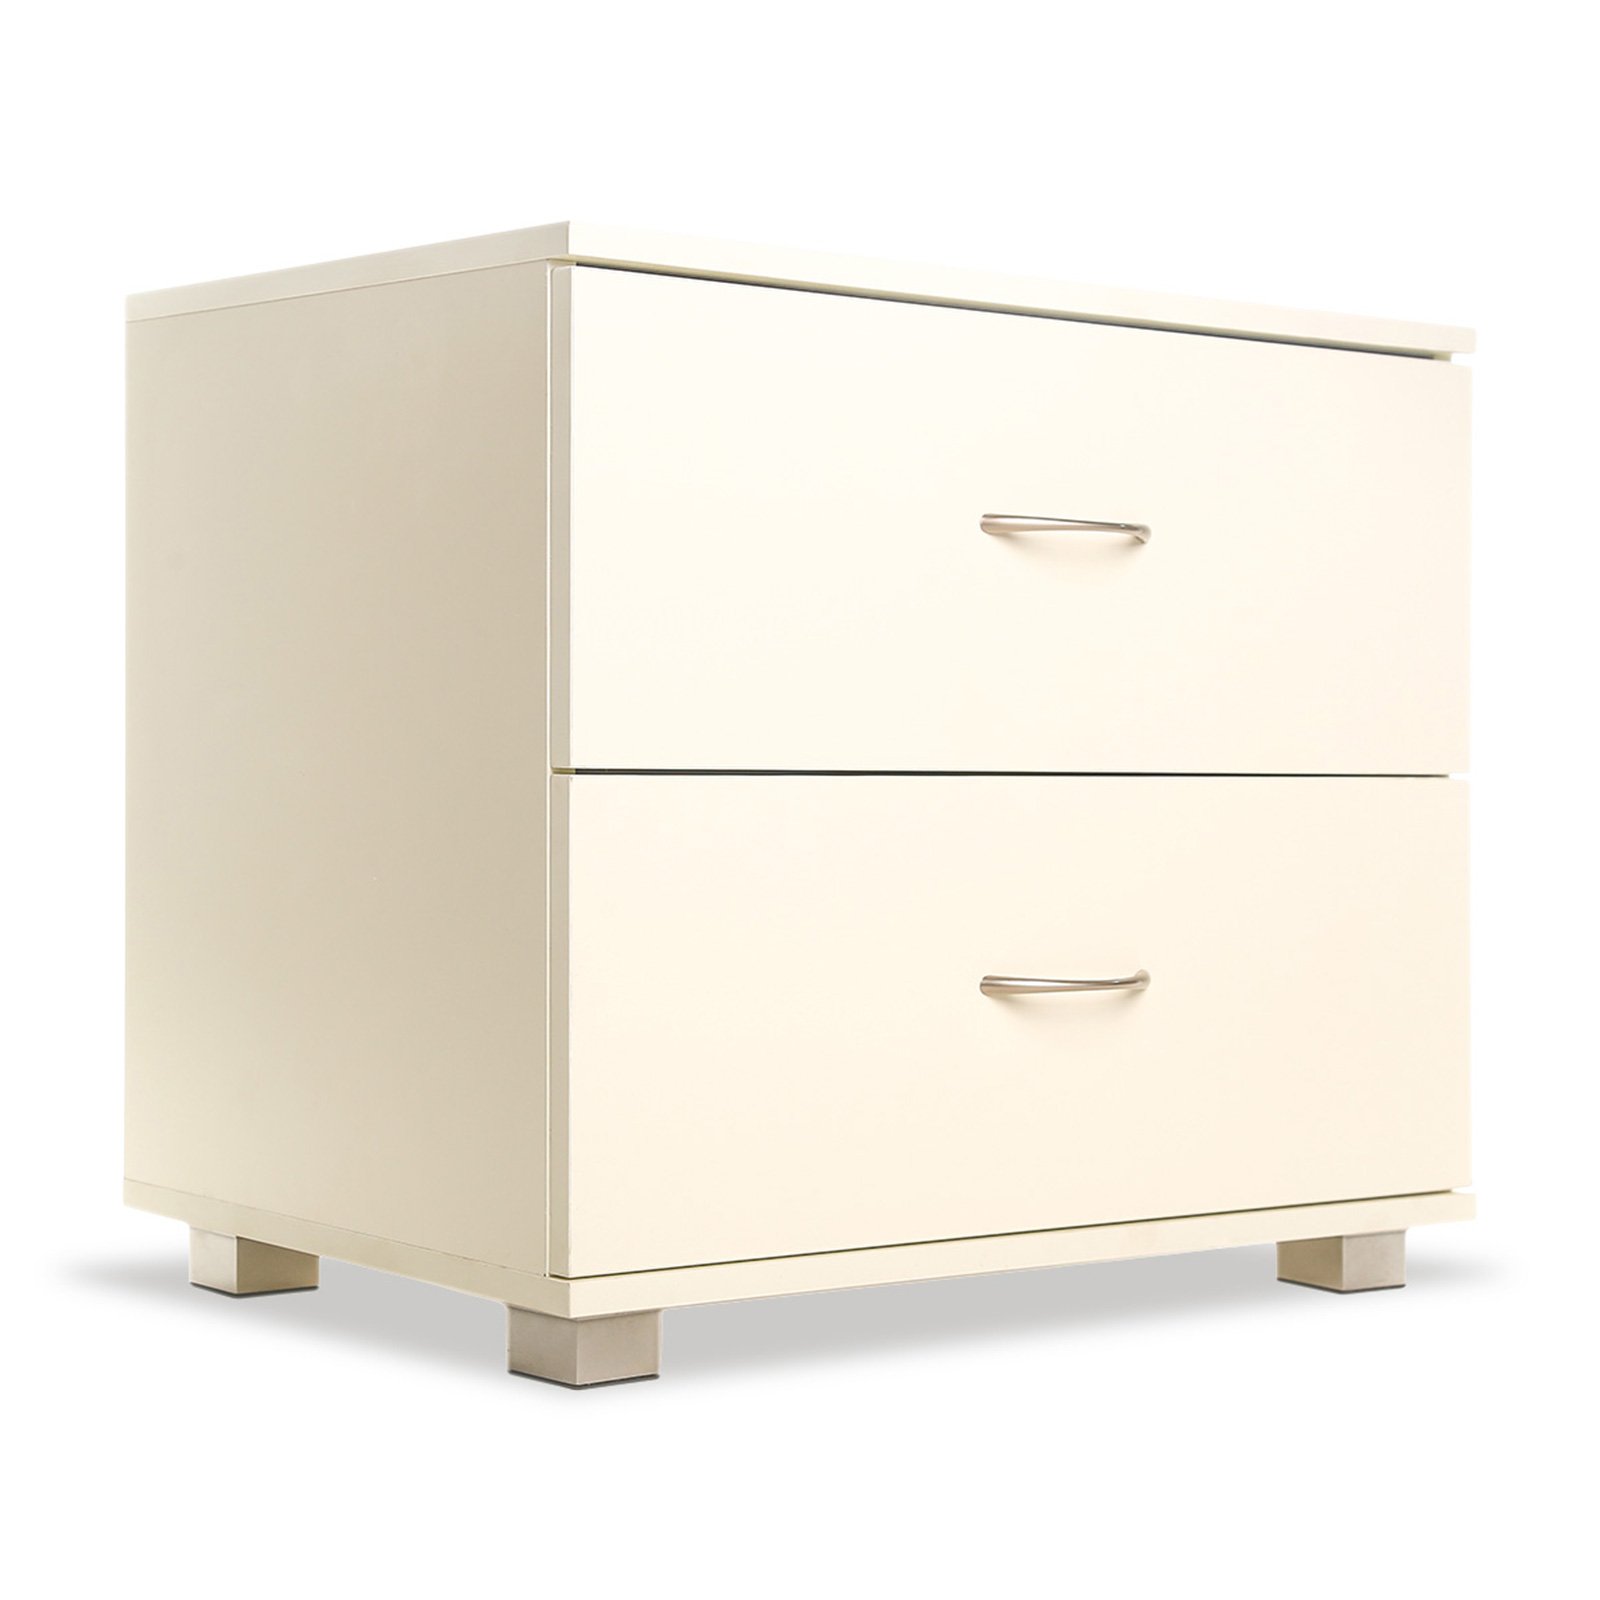 Bedside Table with Drawers MDF Cabinet Storage - White 1